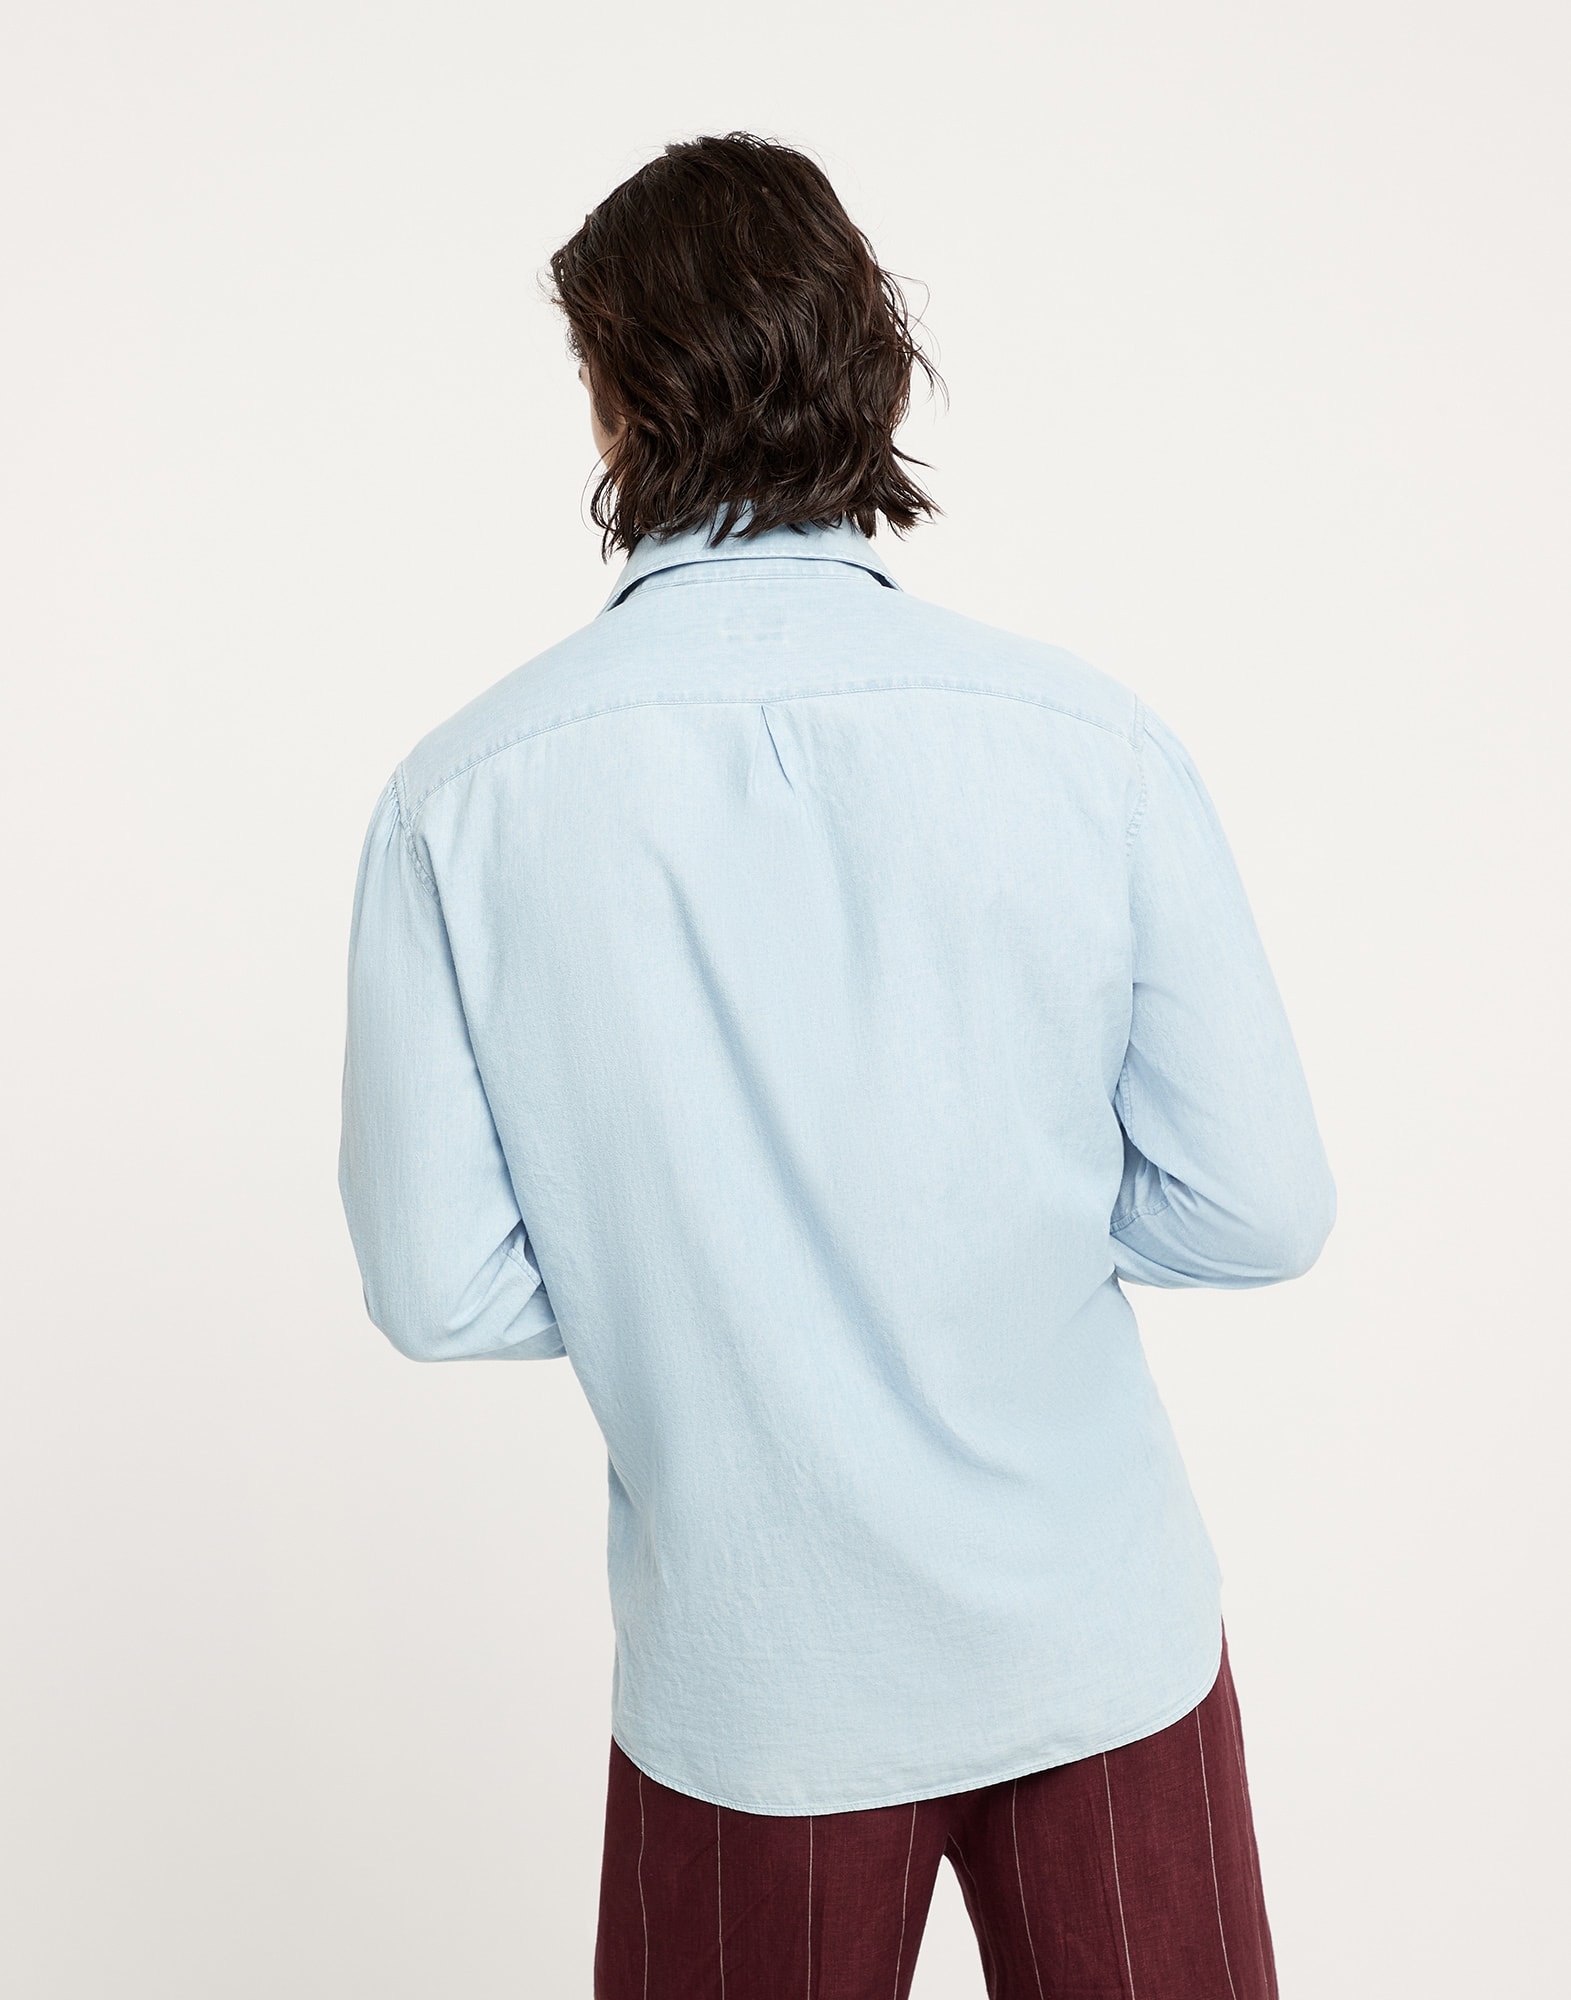 Denim-effect chambray basic fit shirt with spread collar - 2